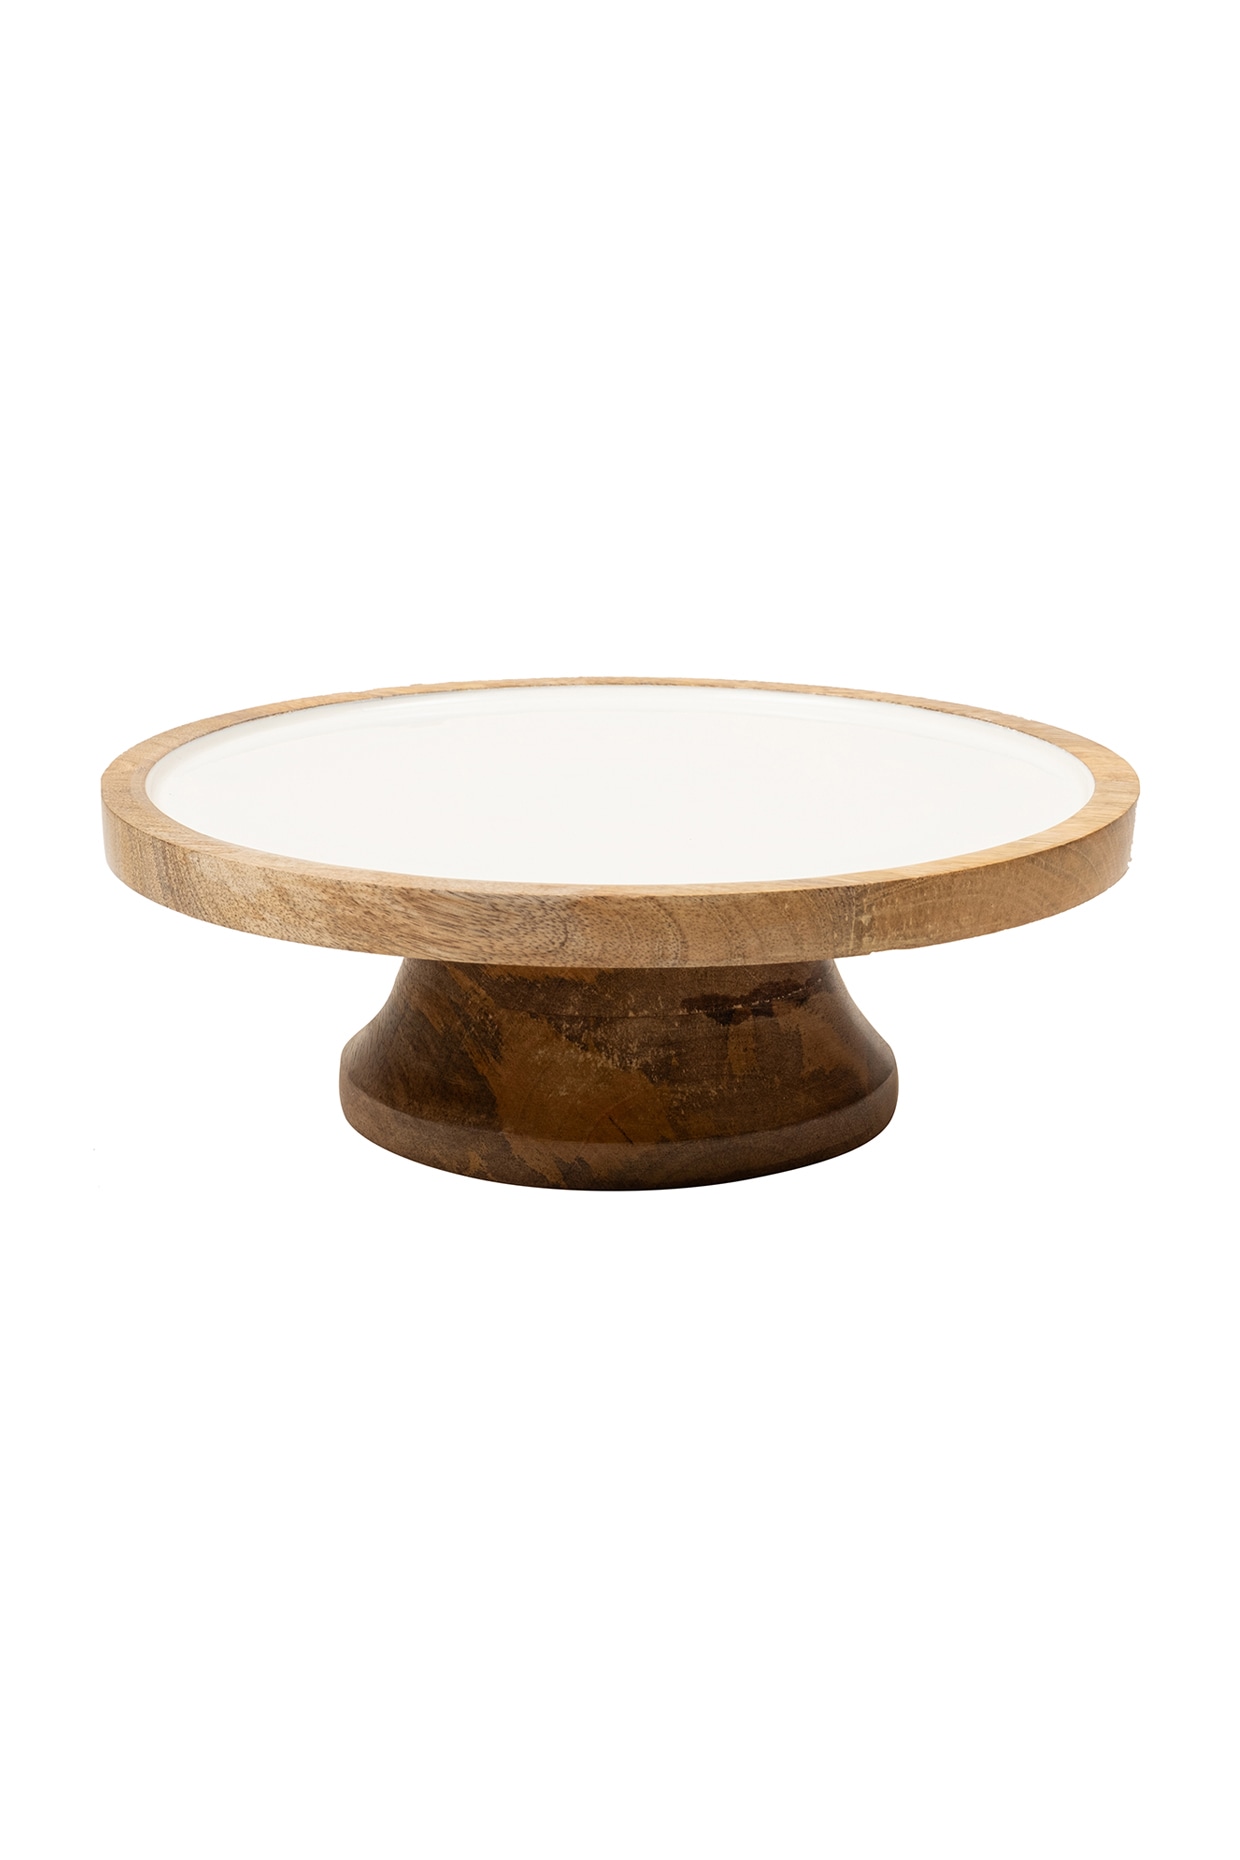 Buy Wooden Geometric Round Cake Stand | Decorative Food Display For Dining Table  Online - Ikiru